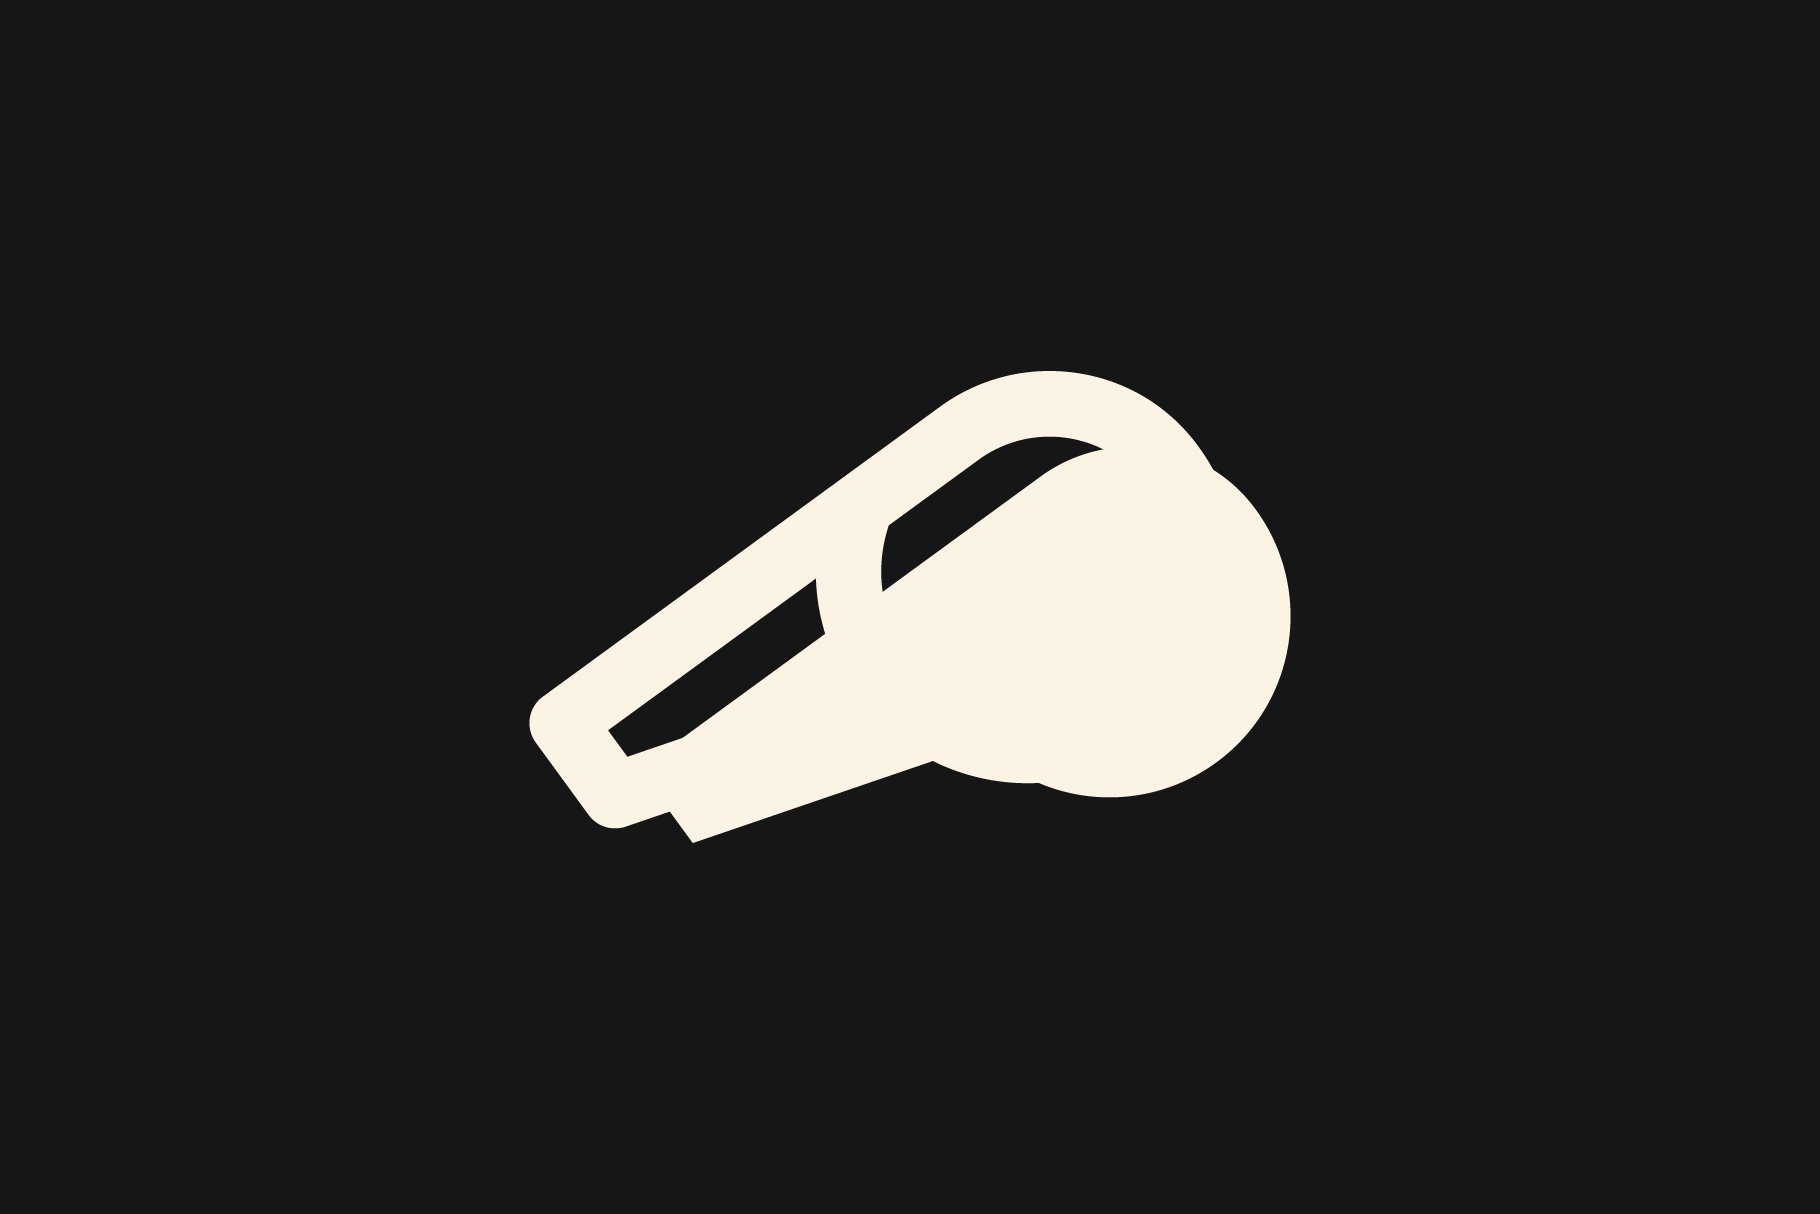 whistle icon design for football preview image.